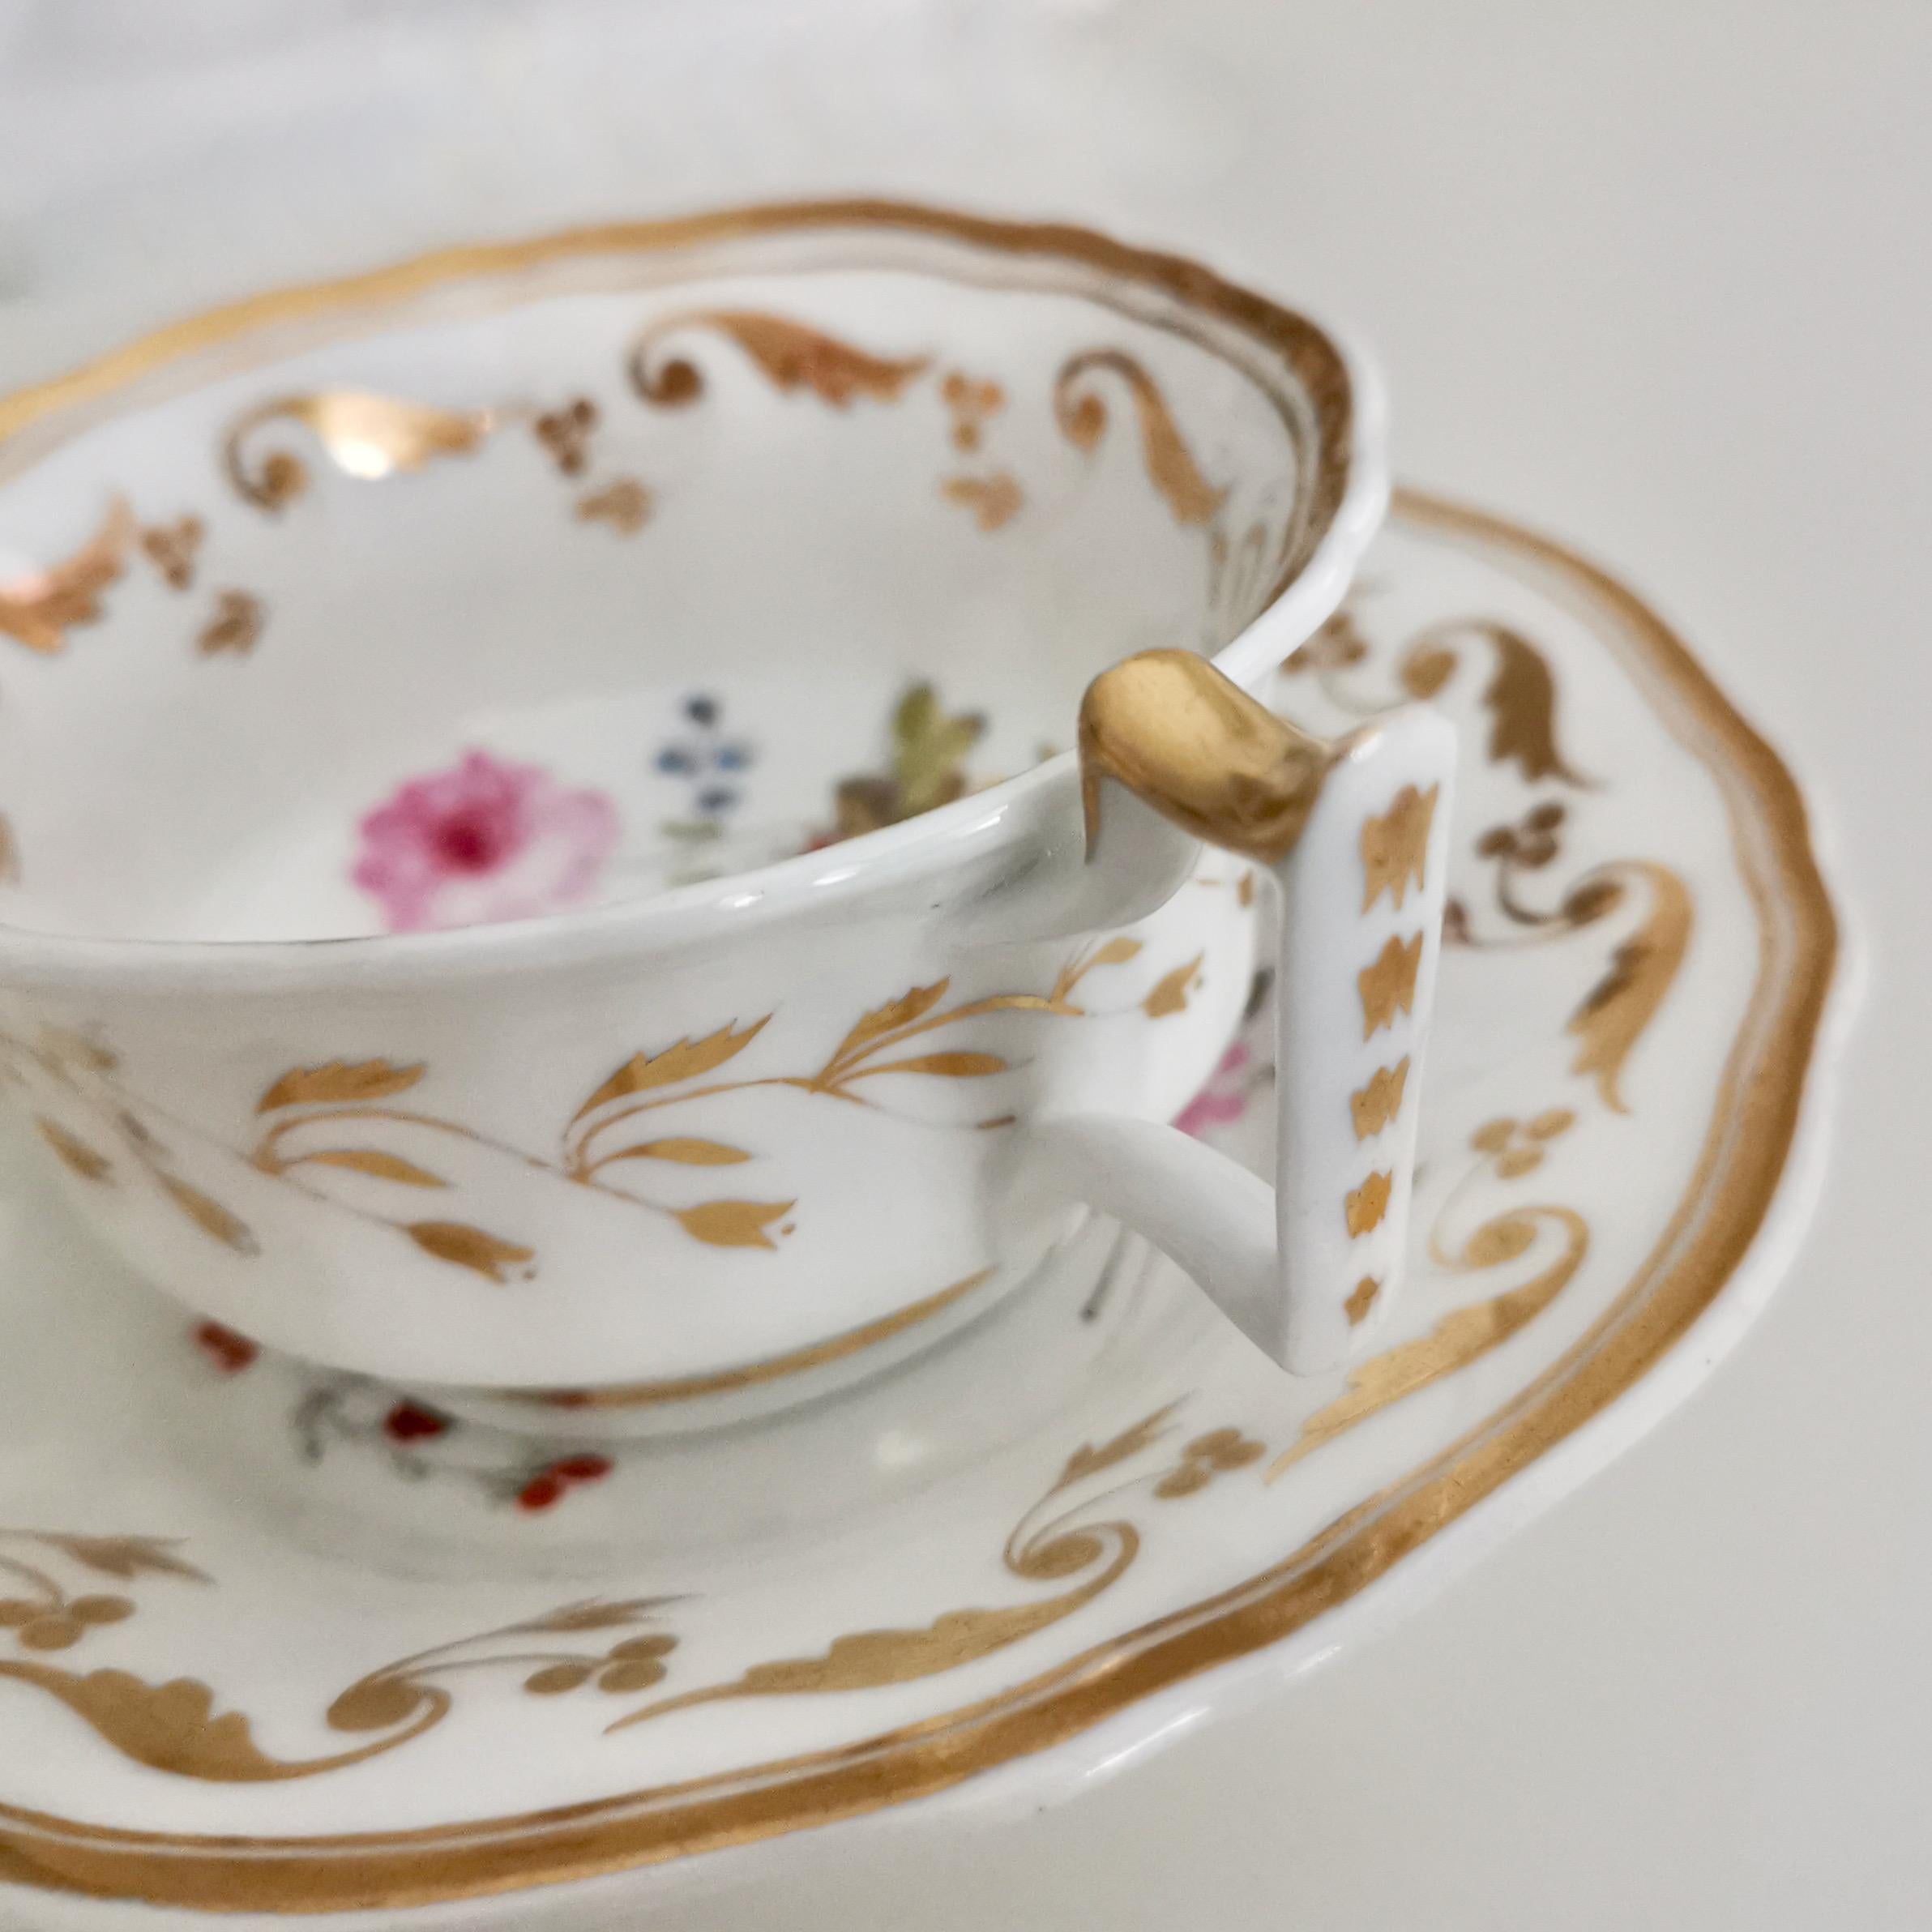 Yates Porcelain Teacup, White with Gilt and Flowers, Regency, circa 1825 6